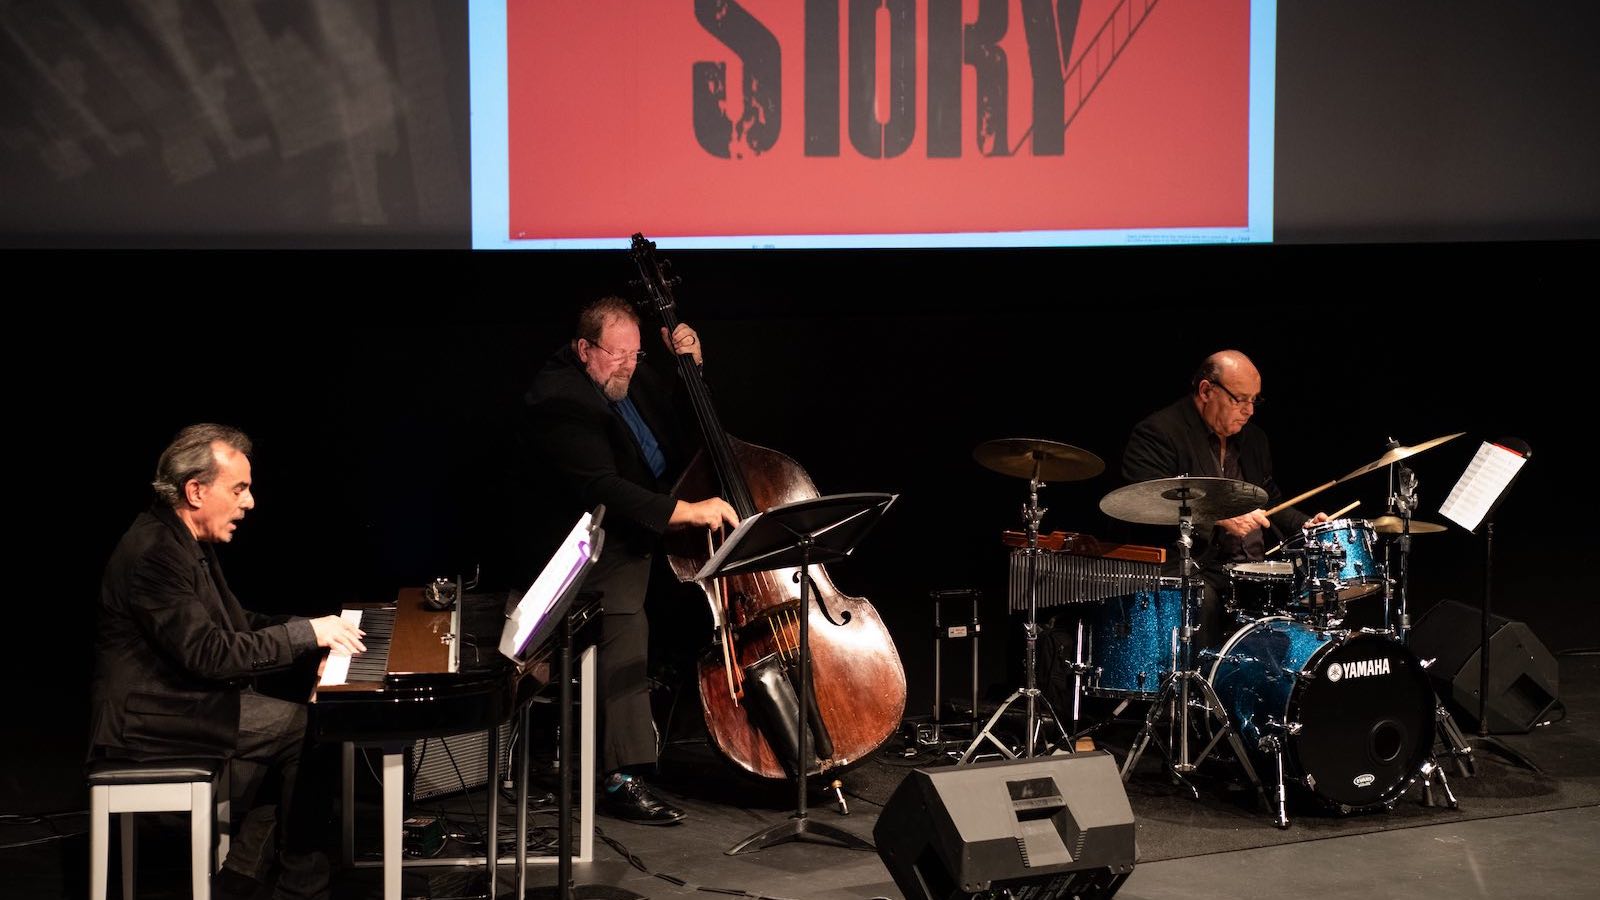 Three men play a piano, cello, and drums on a stage in front of a screen